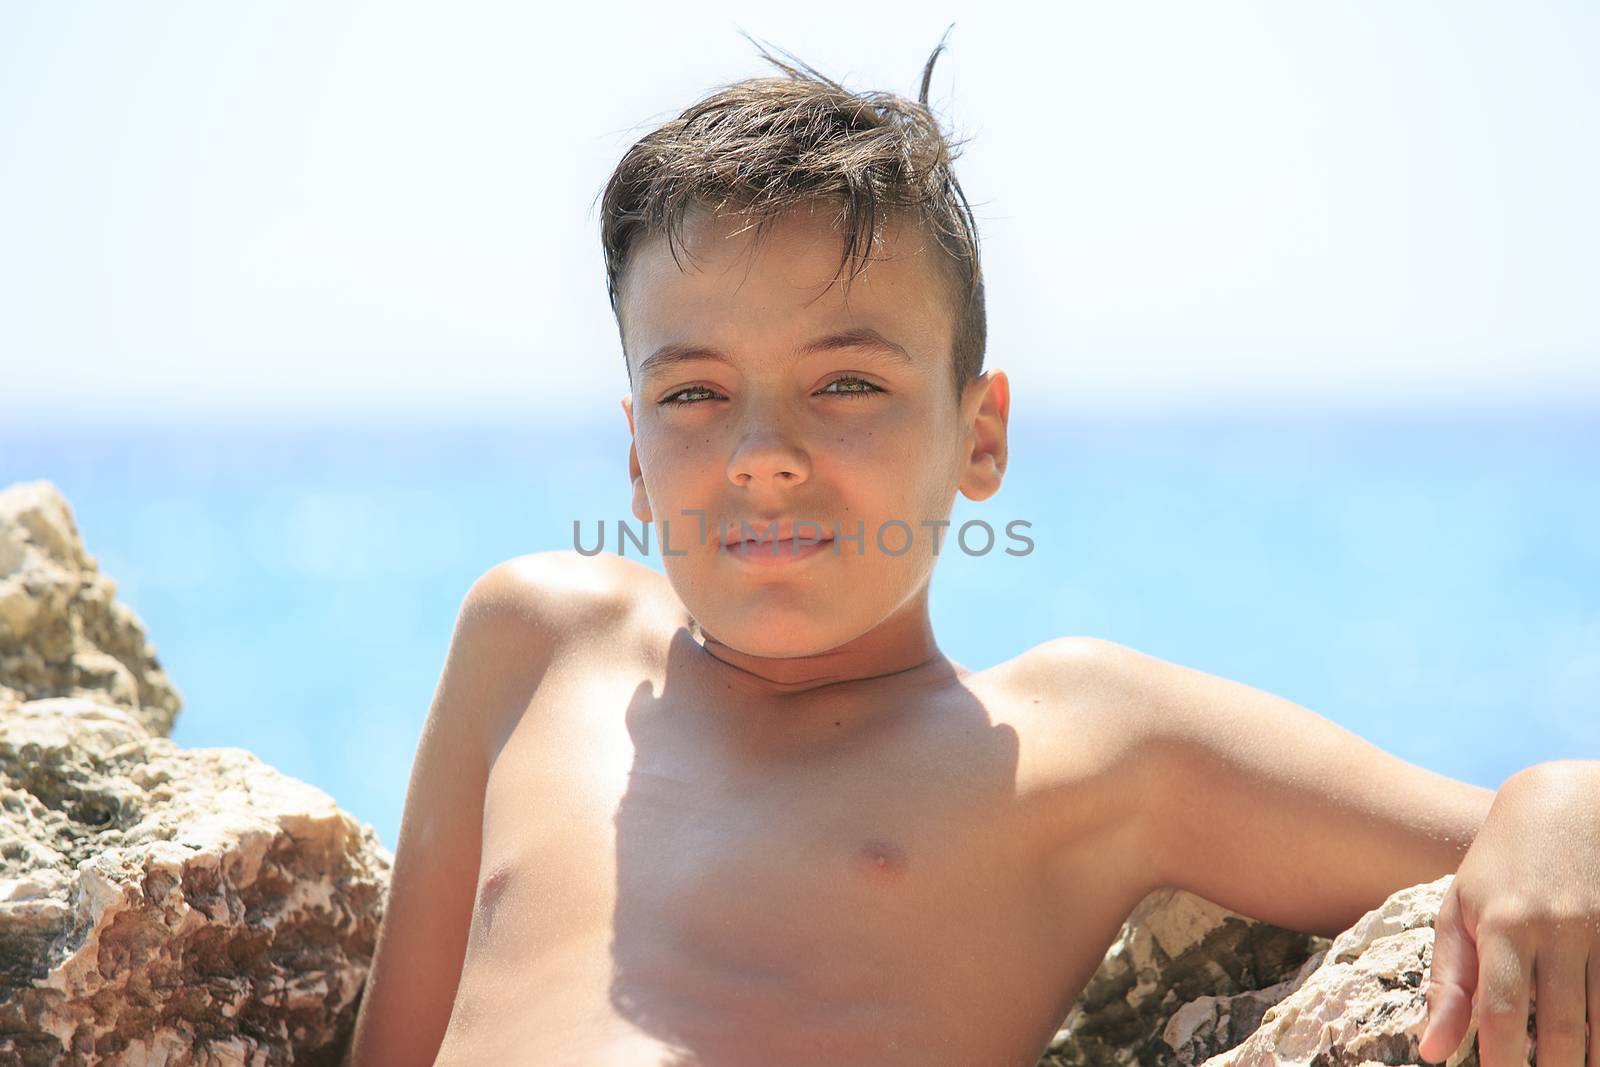 Boy with beautiful green eyes on the beach